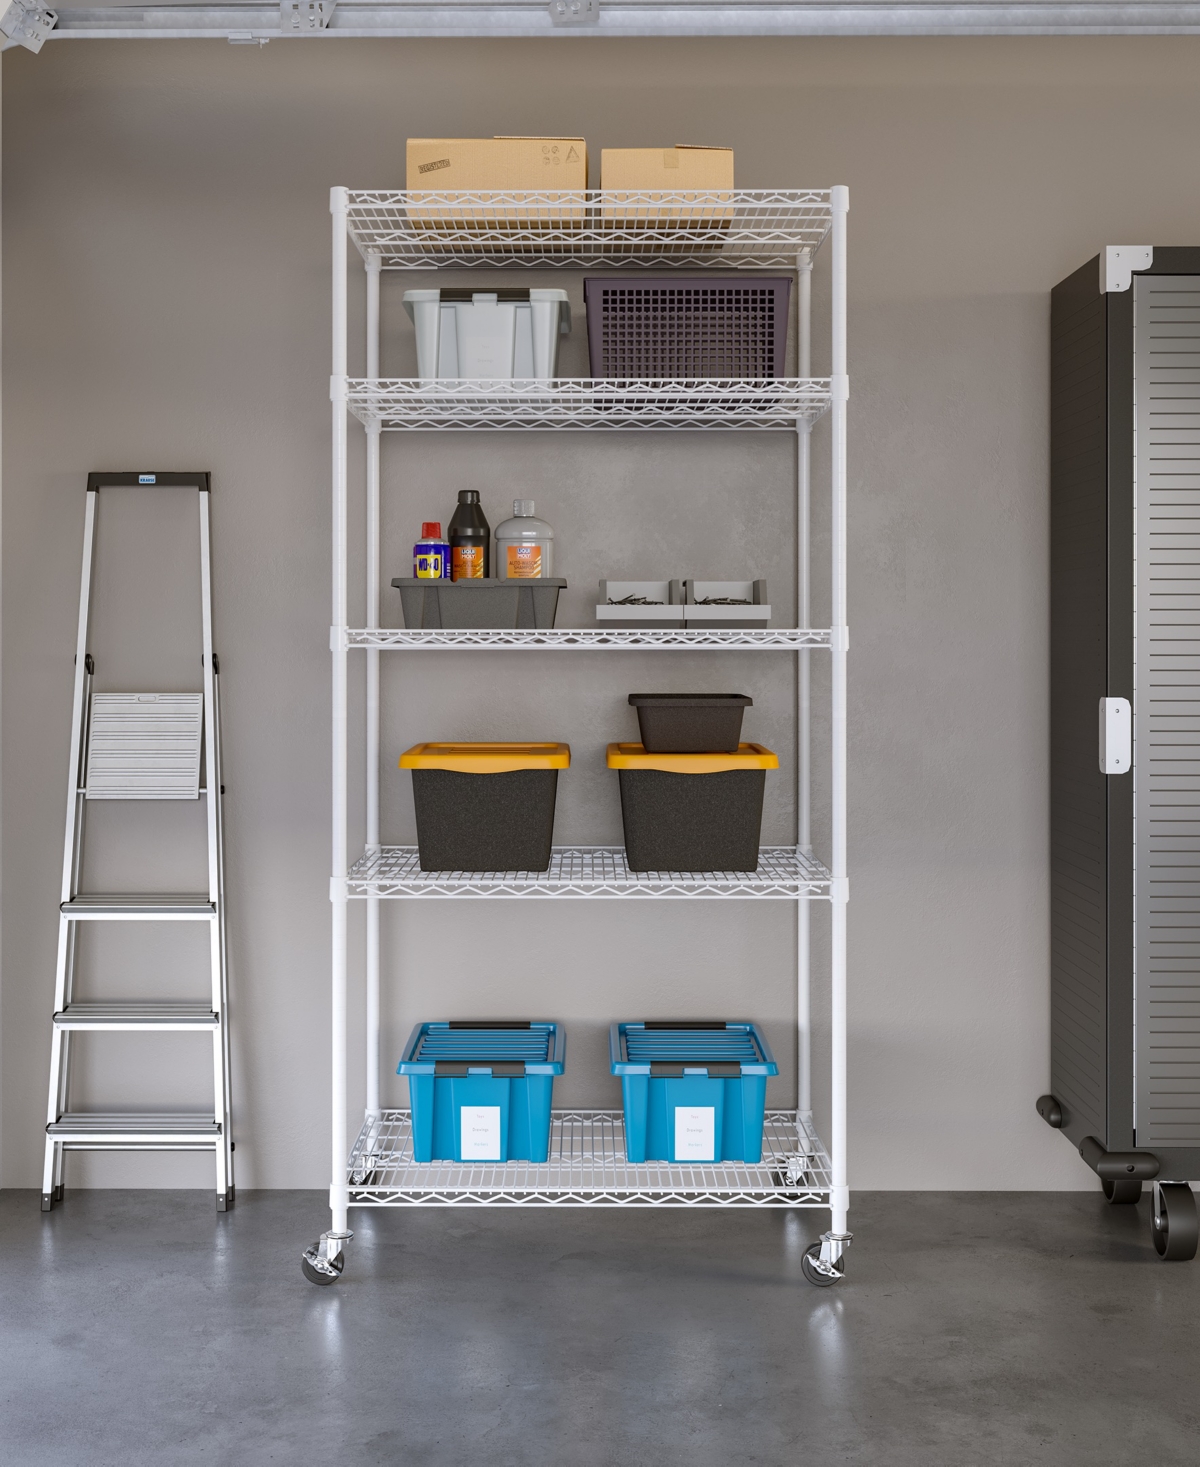 Shop Seville Classics Ultradurable 5-tier Nsf Steel Wire Shelving System In White